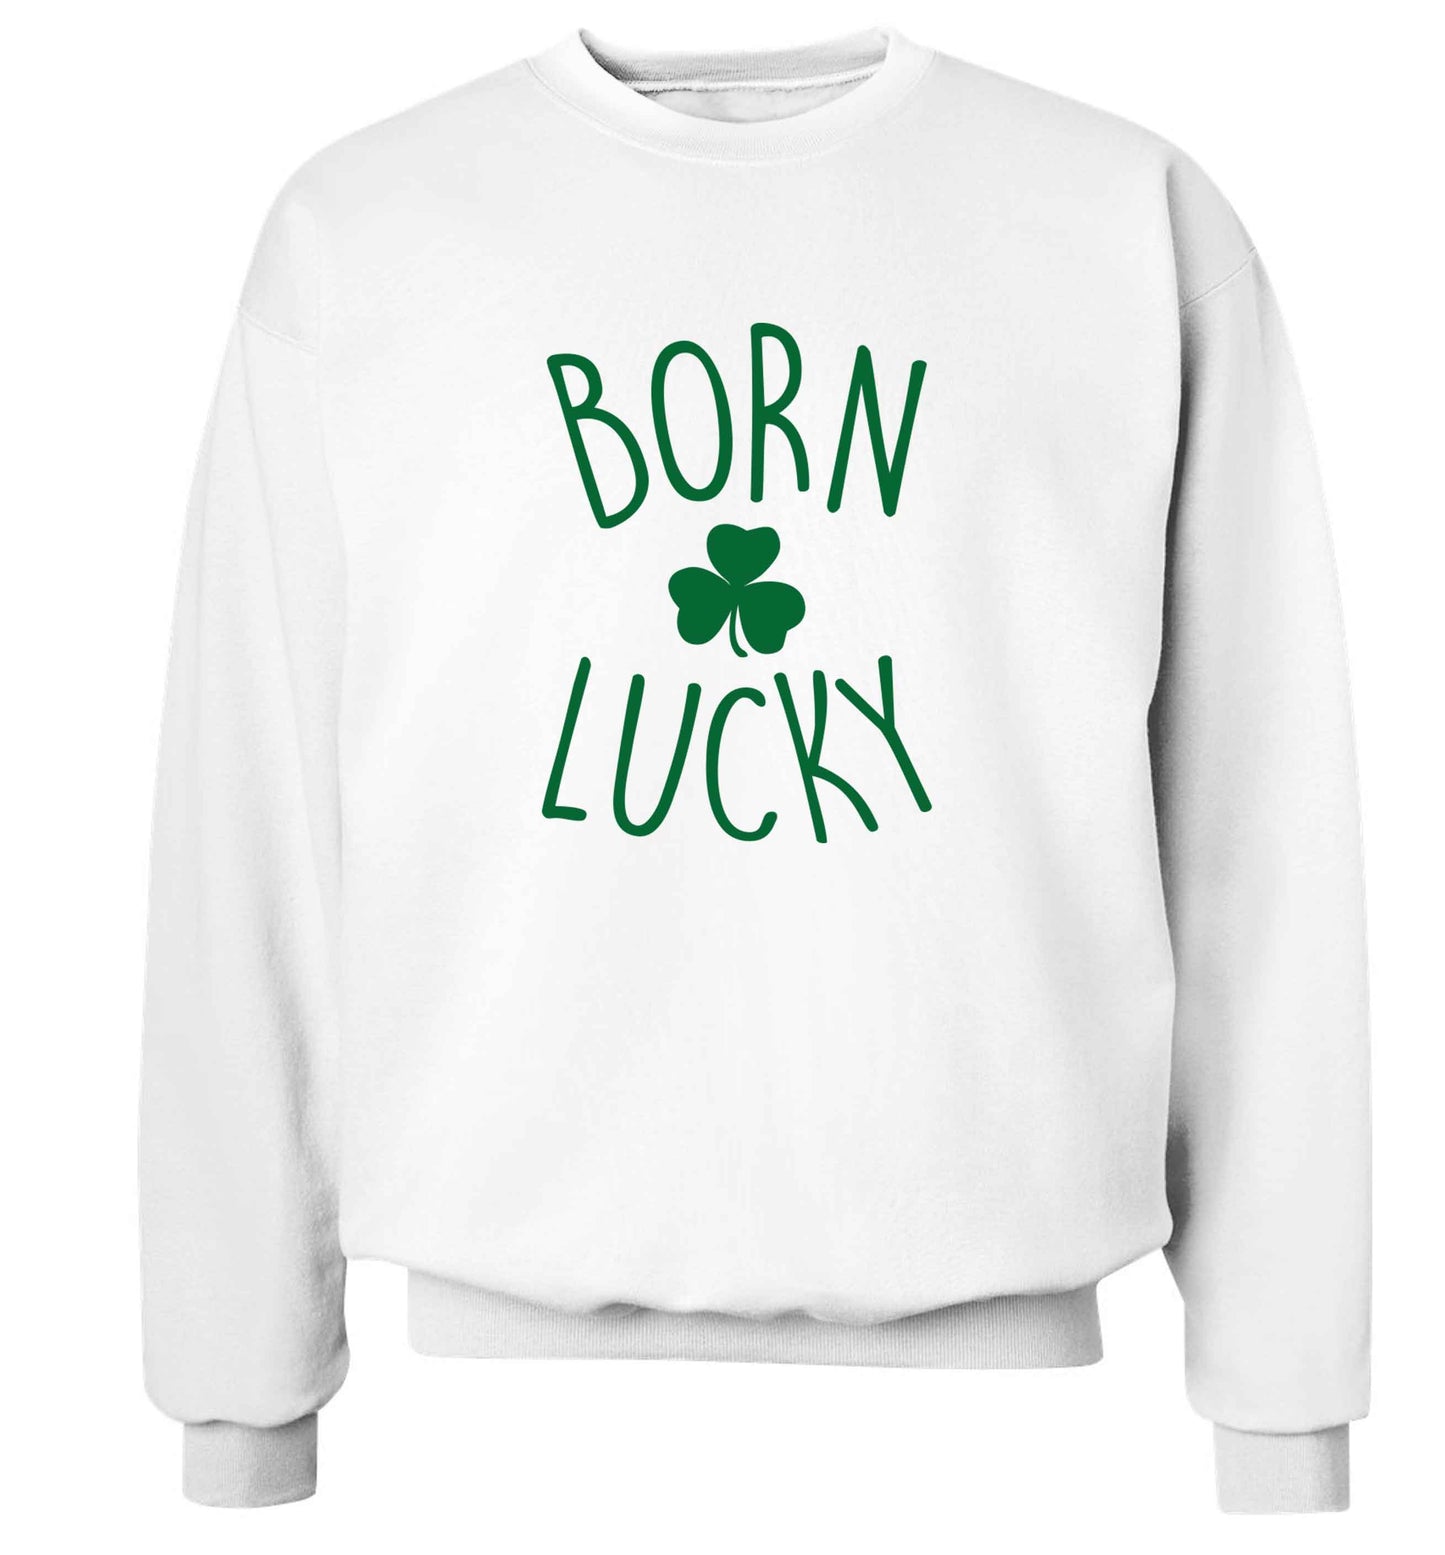 Born Lucky adult's unisex white sweater 2XL